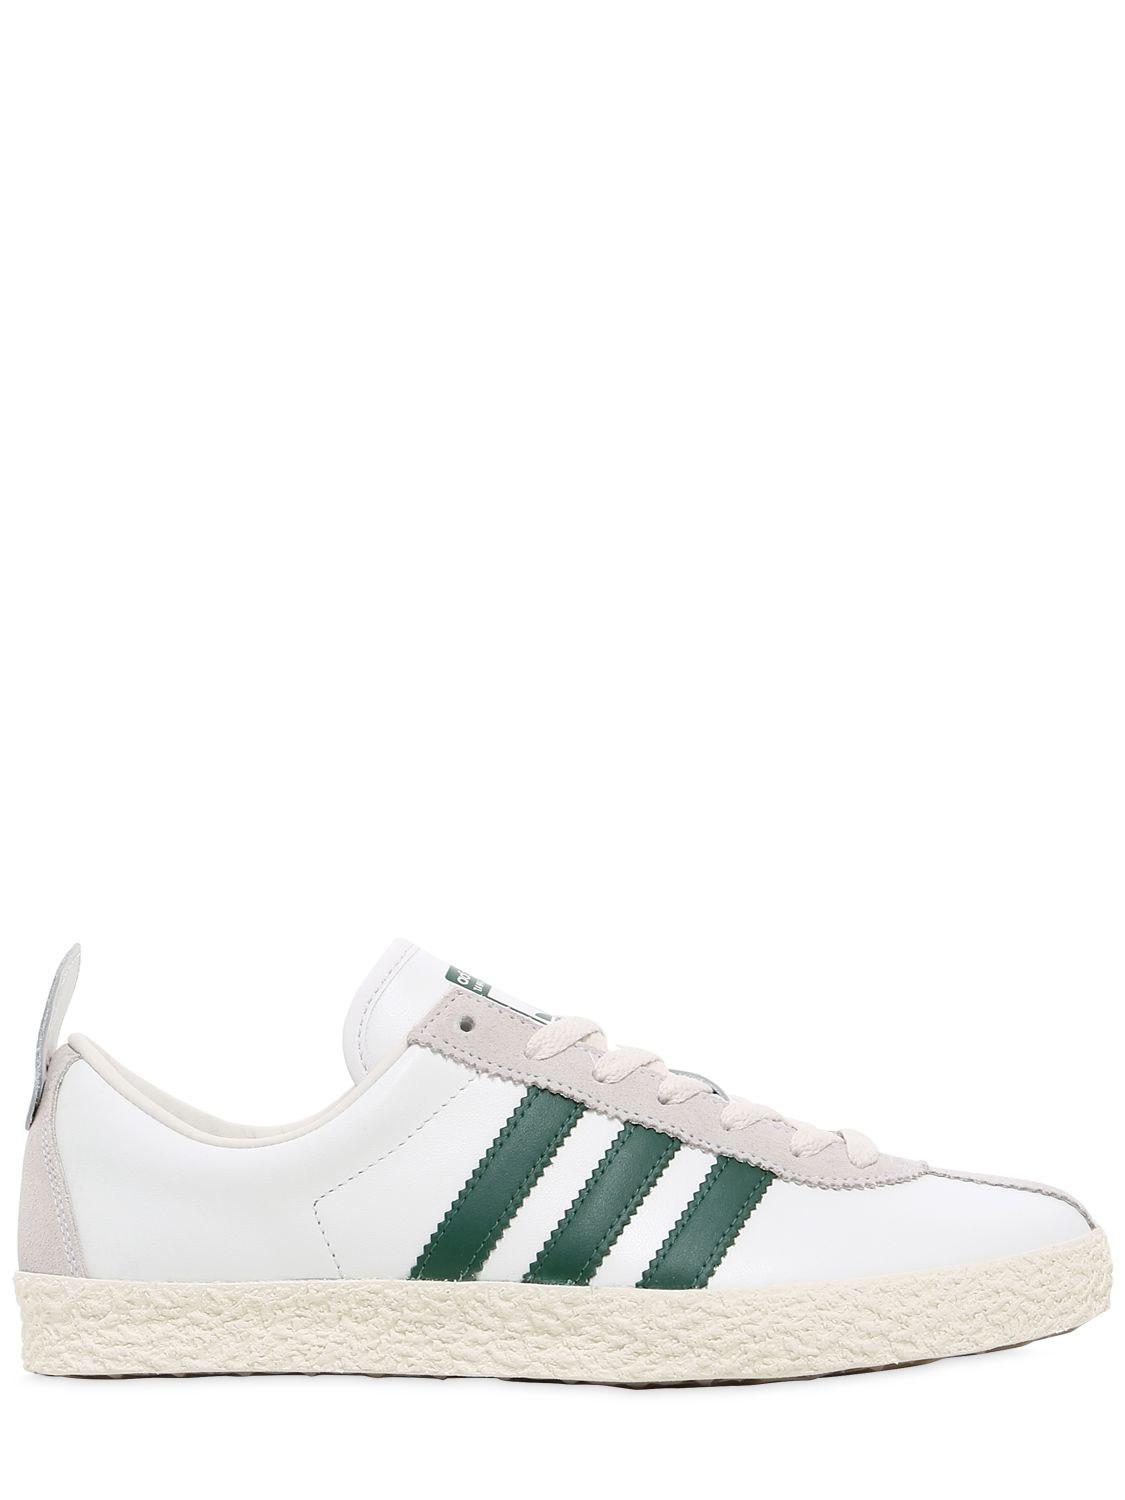 Lyst - Adidas Originals Spzl Trainer Leather Sneakers in White for Men